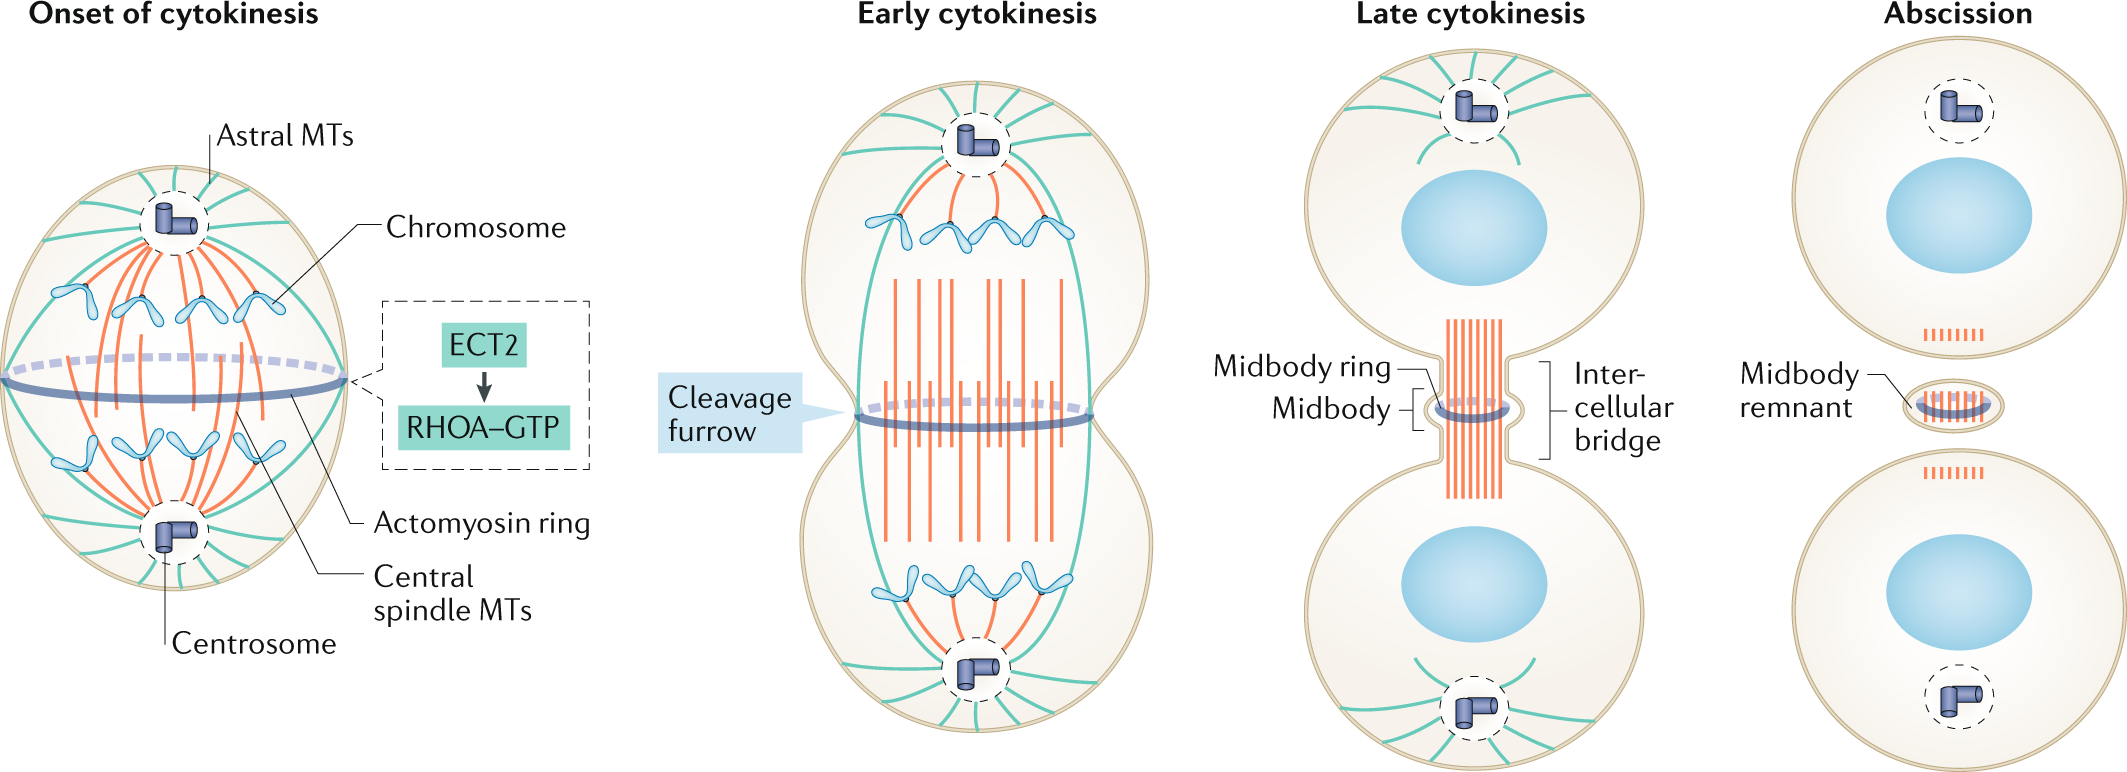 Cytokinesis Defects And Cancer Nature Reviews Cancer